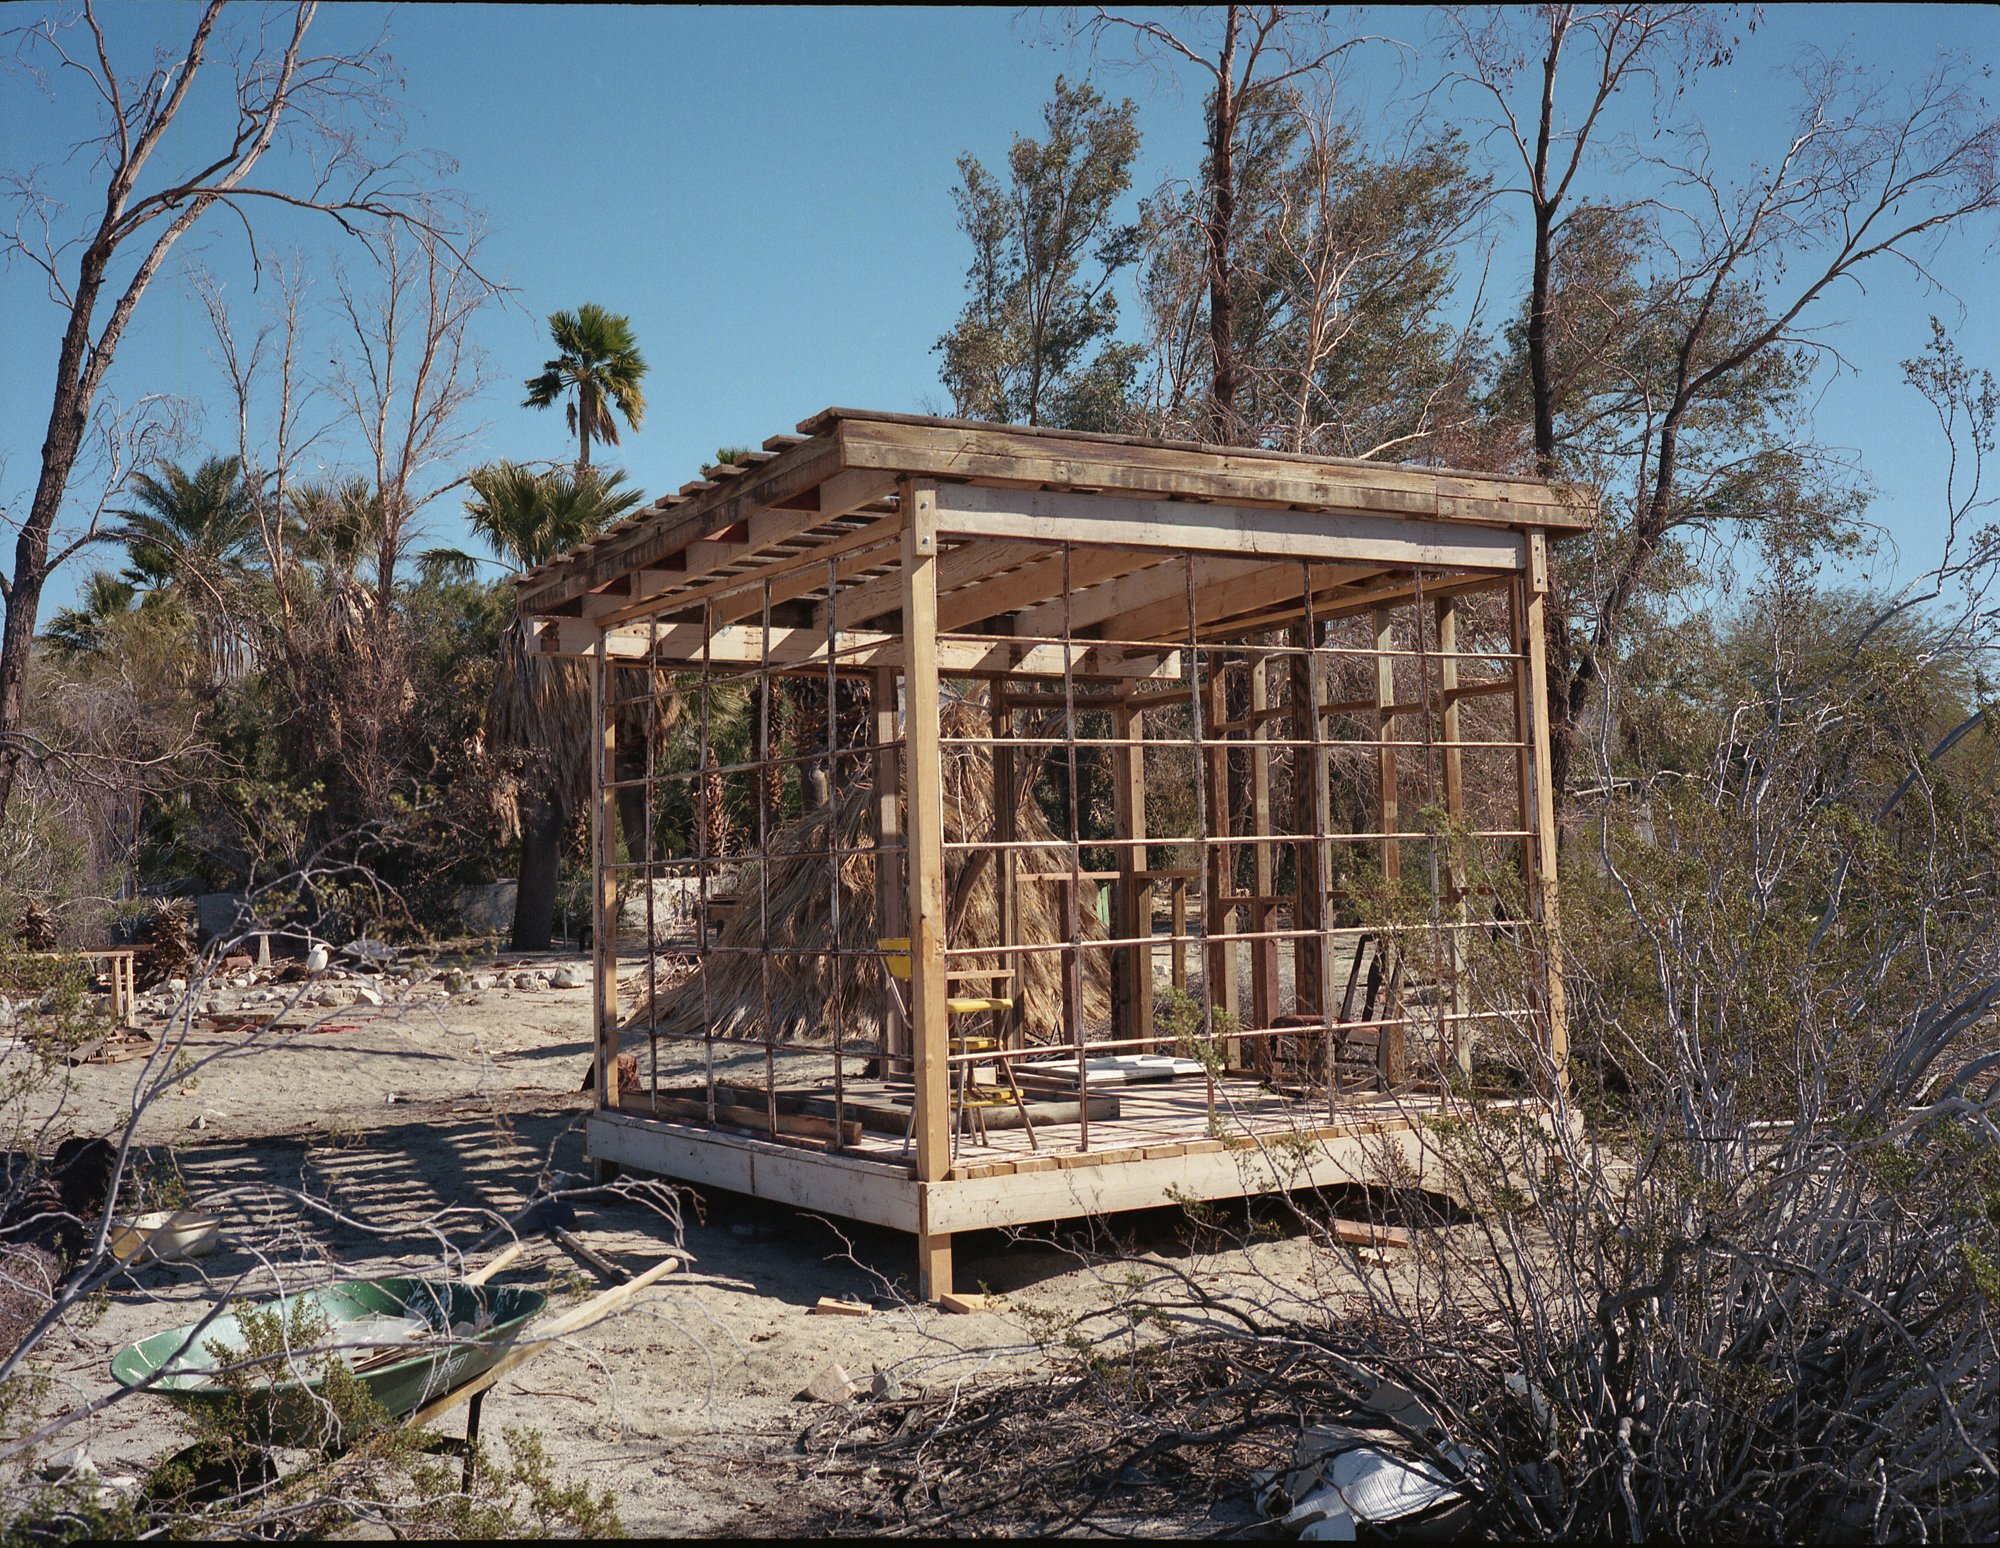  I went out to visit Harlan at his shack about 8 weeks ago and this is the stage it was at. He had just put up the framing, all with lumber he found around the desert.  